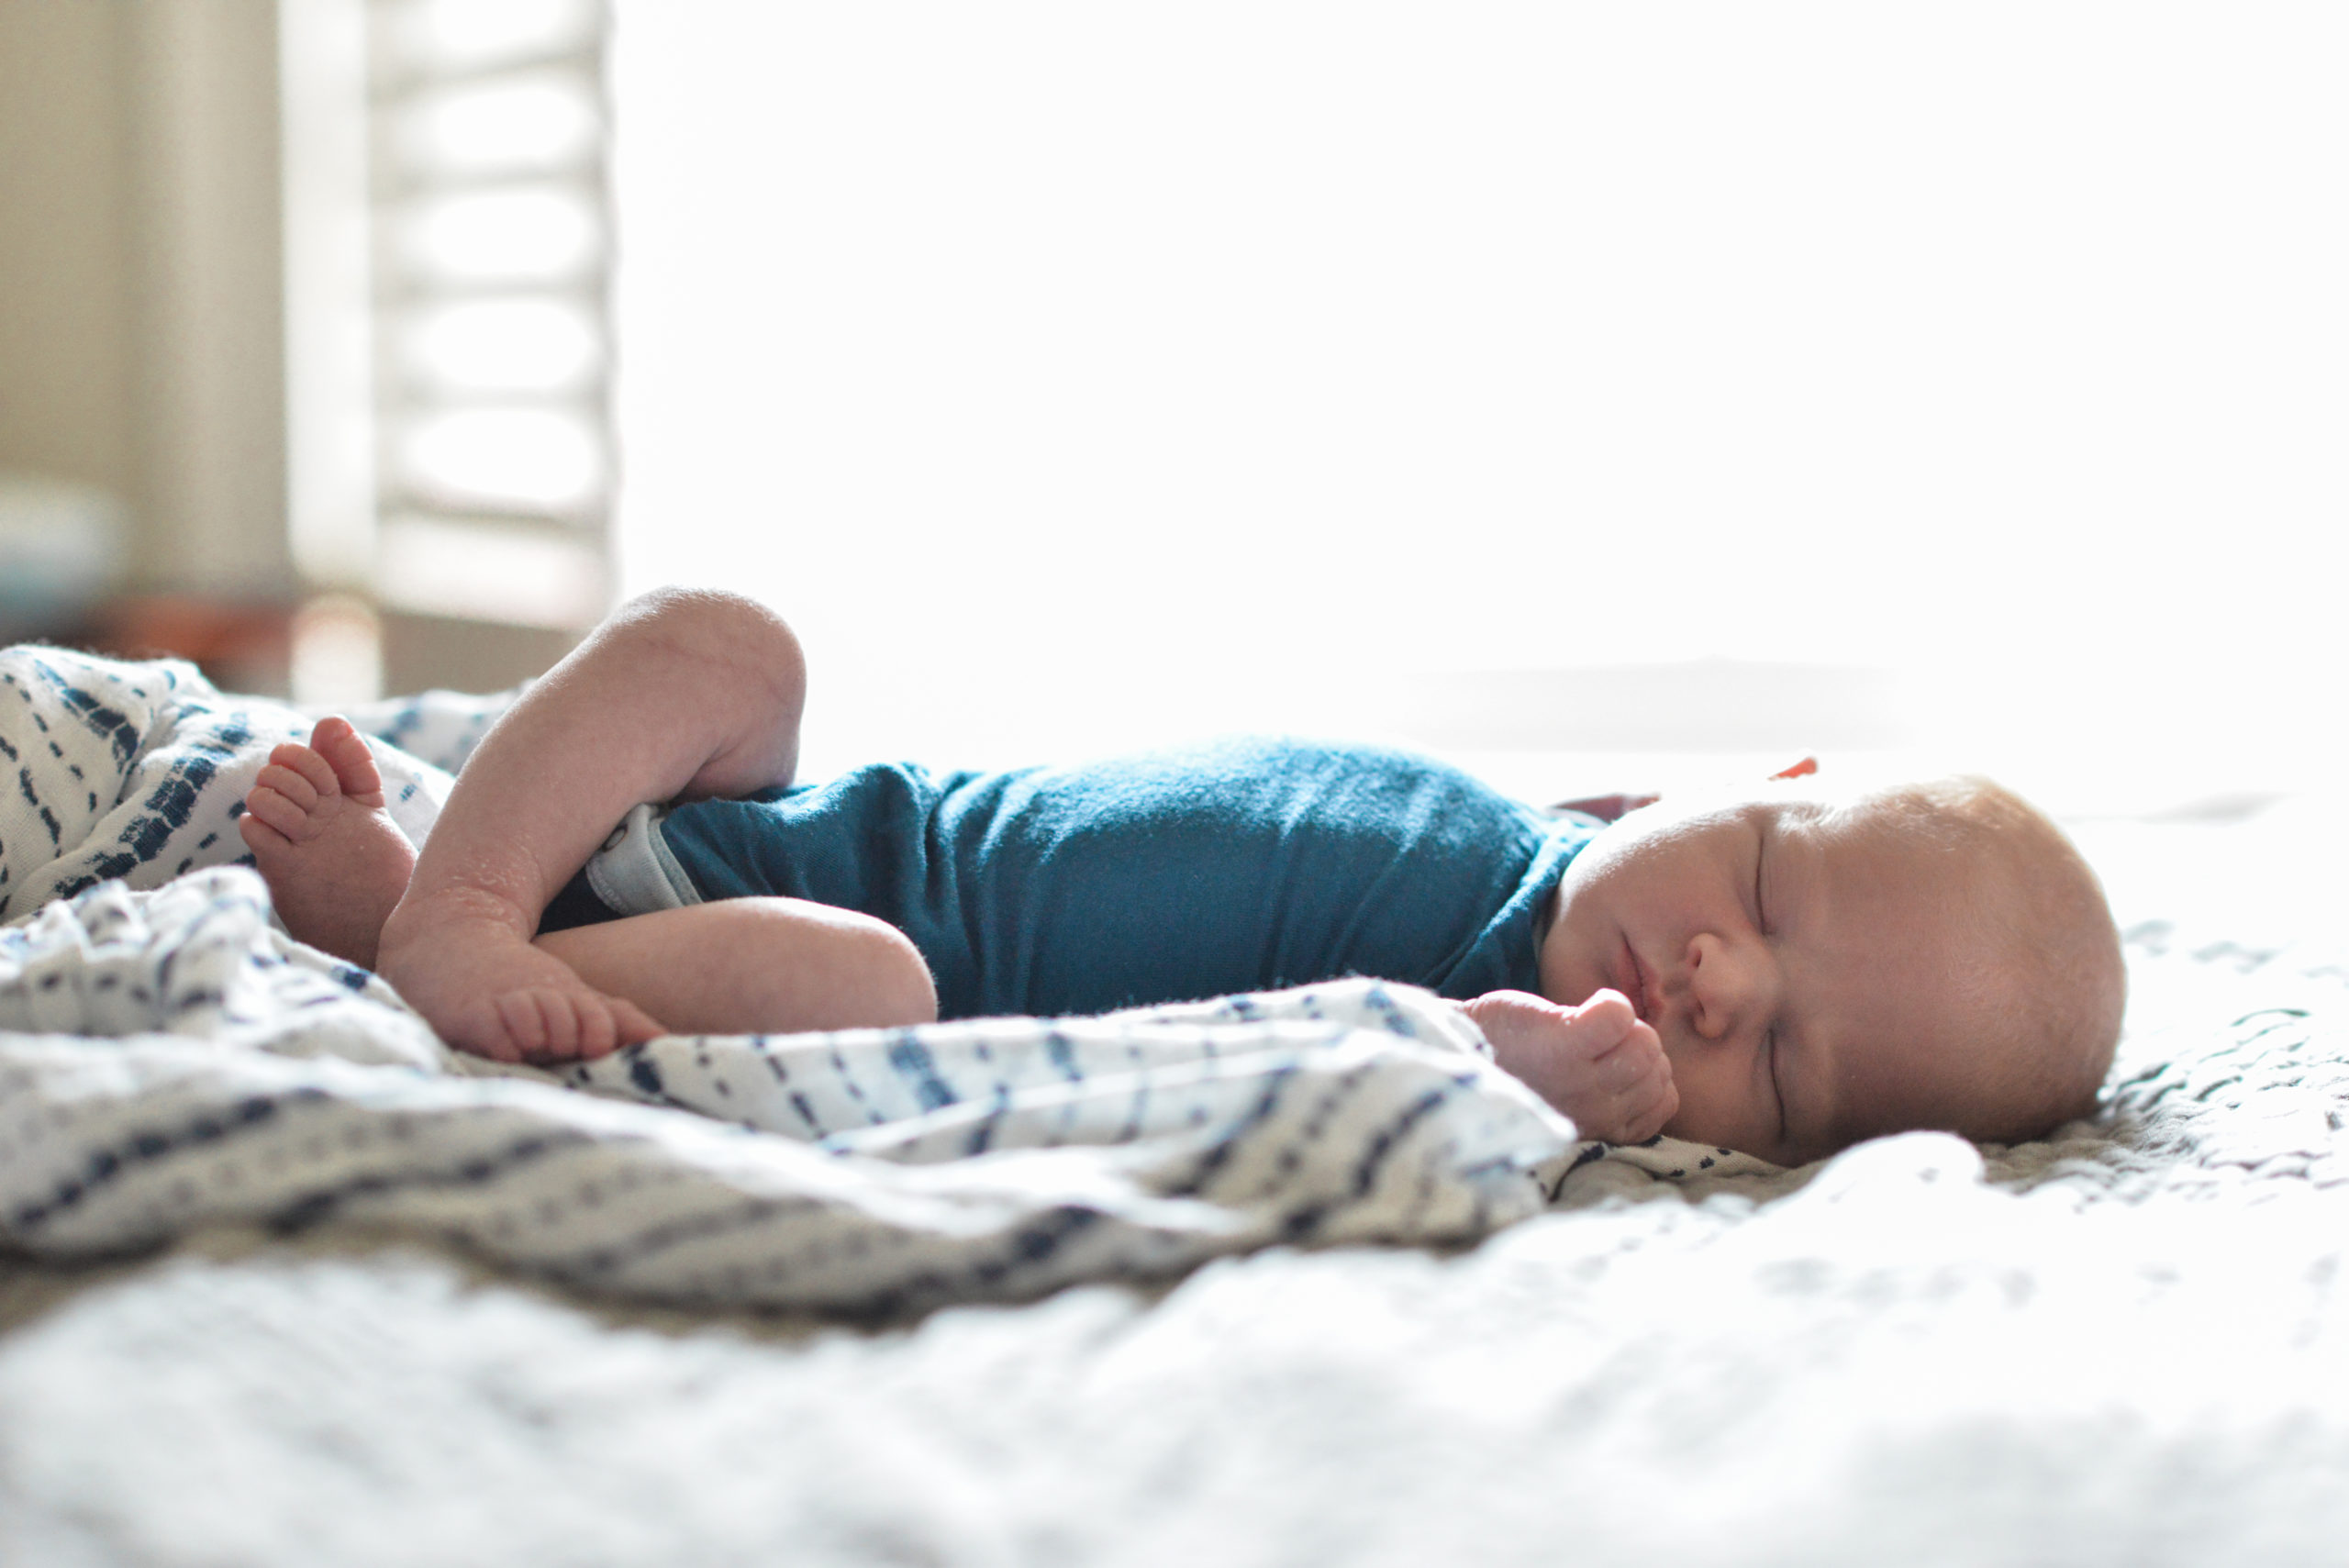 streaming light pours onto sleeping baby